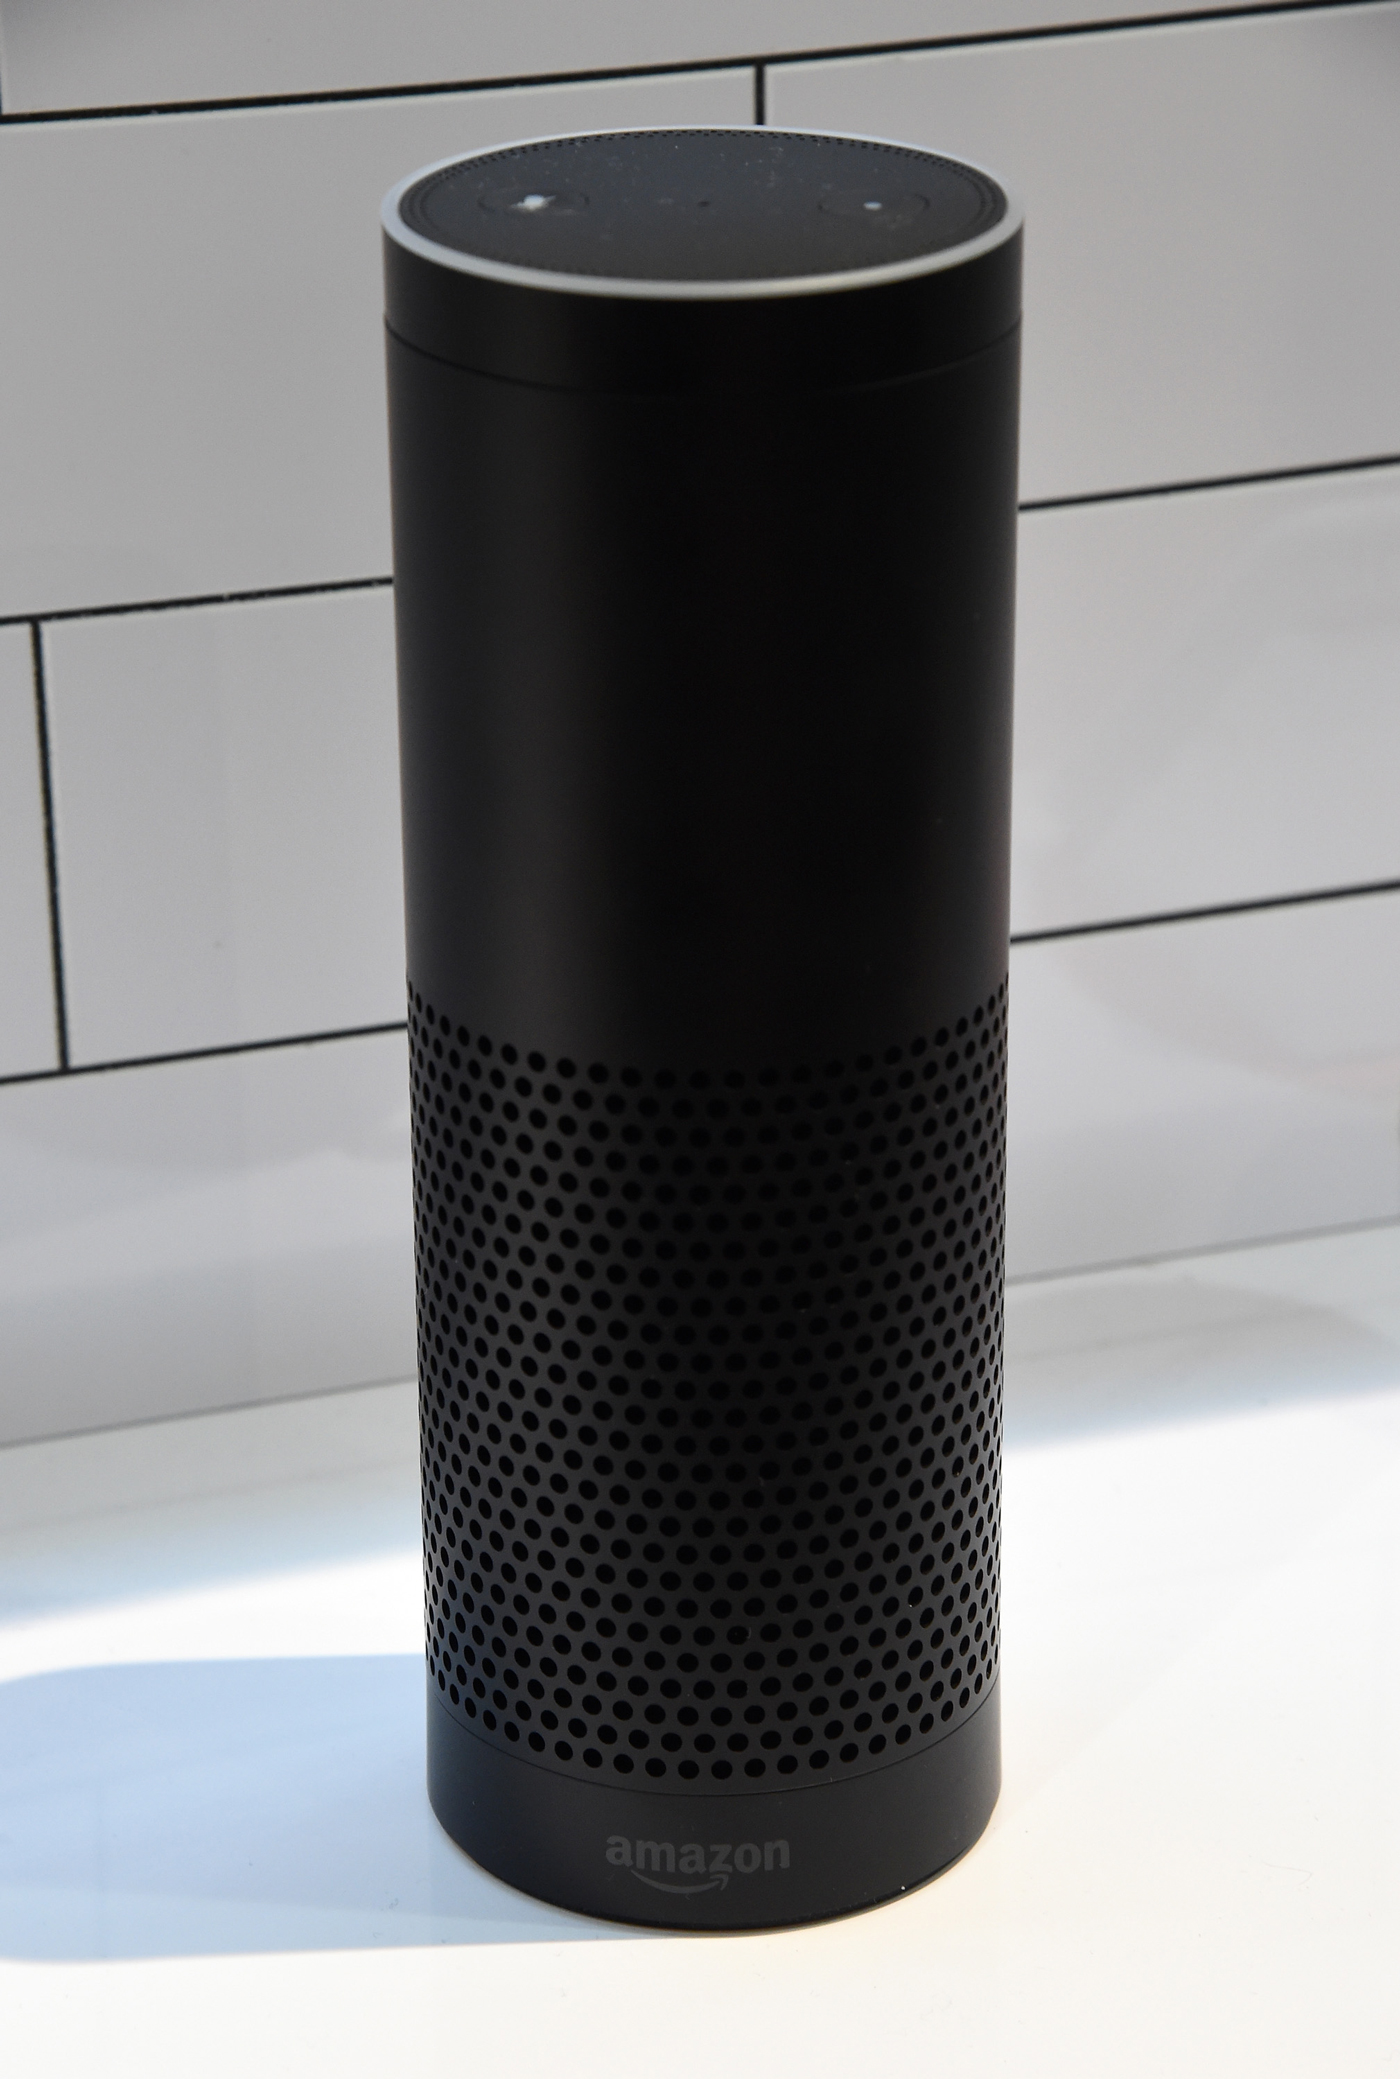 The Amazon Echo is Alexa's embodiment in the physical world.